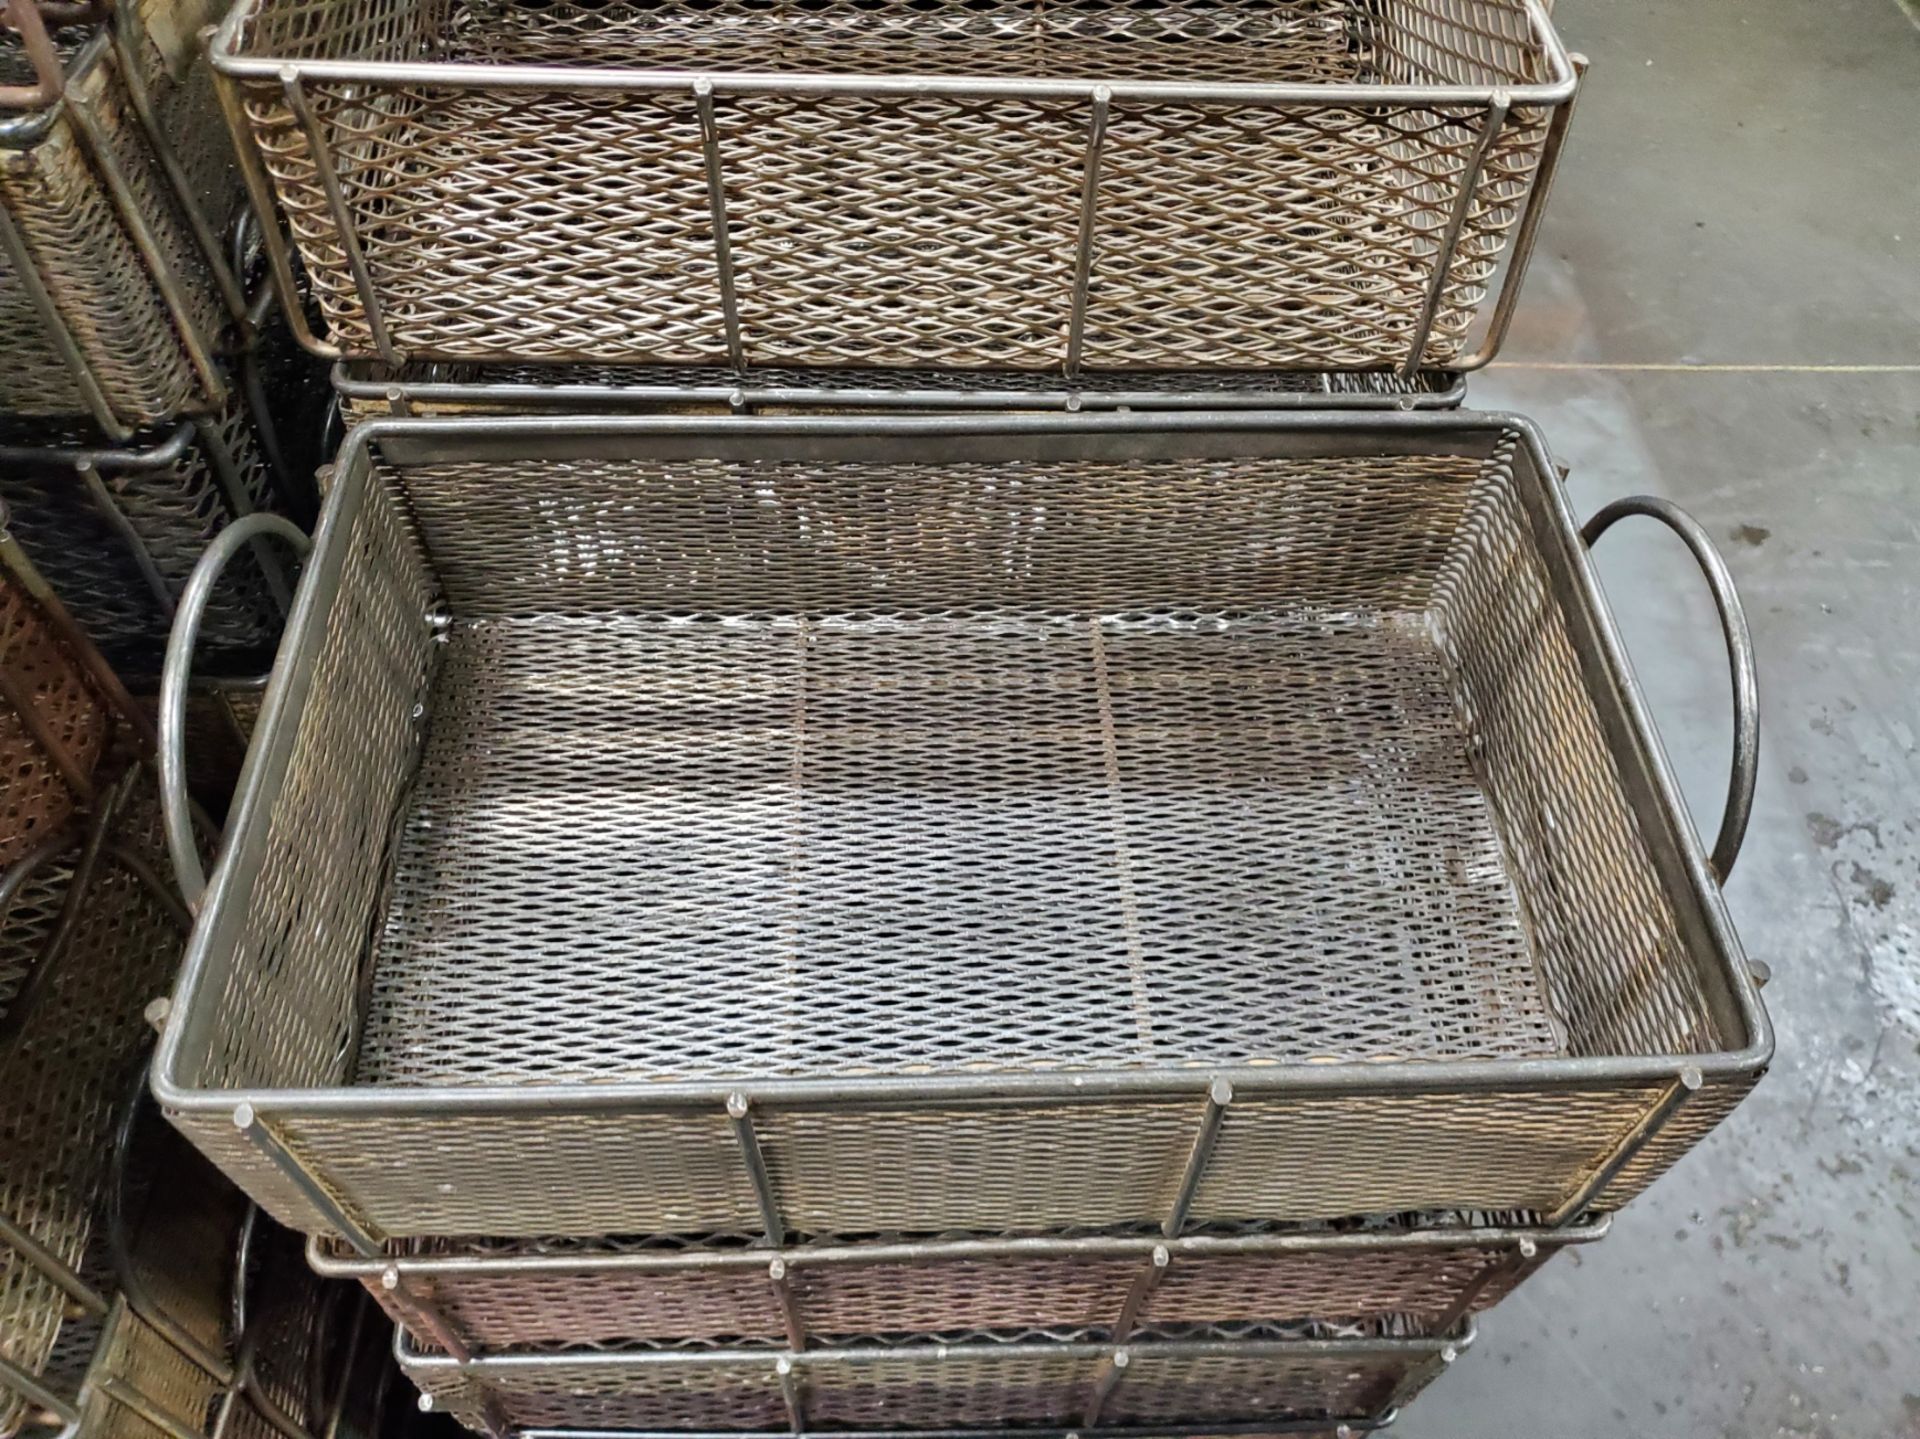 Lot of (134) 12" x 20" x 5 1/2" Steel Mesh Stackable Baskets - Image 2 of 2